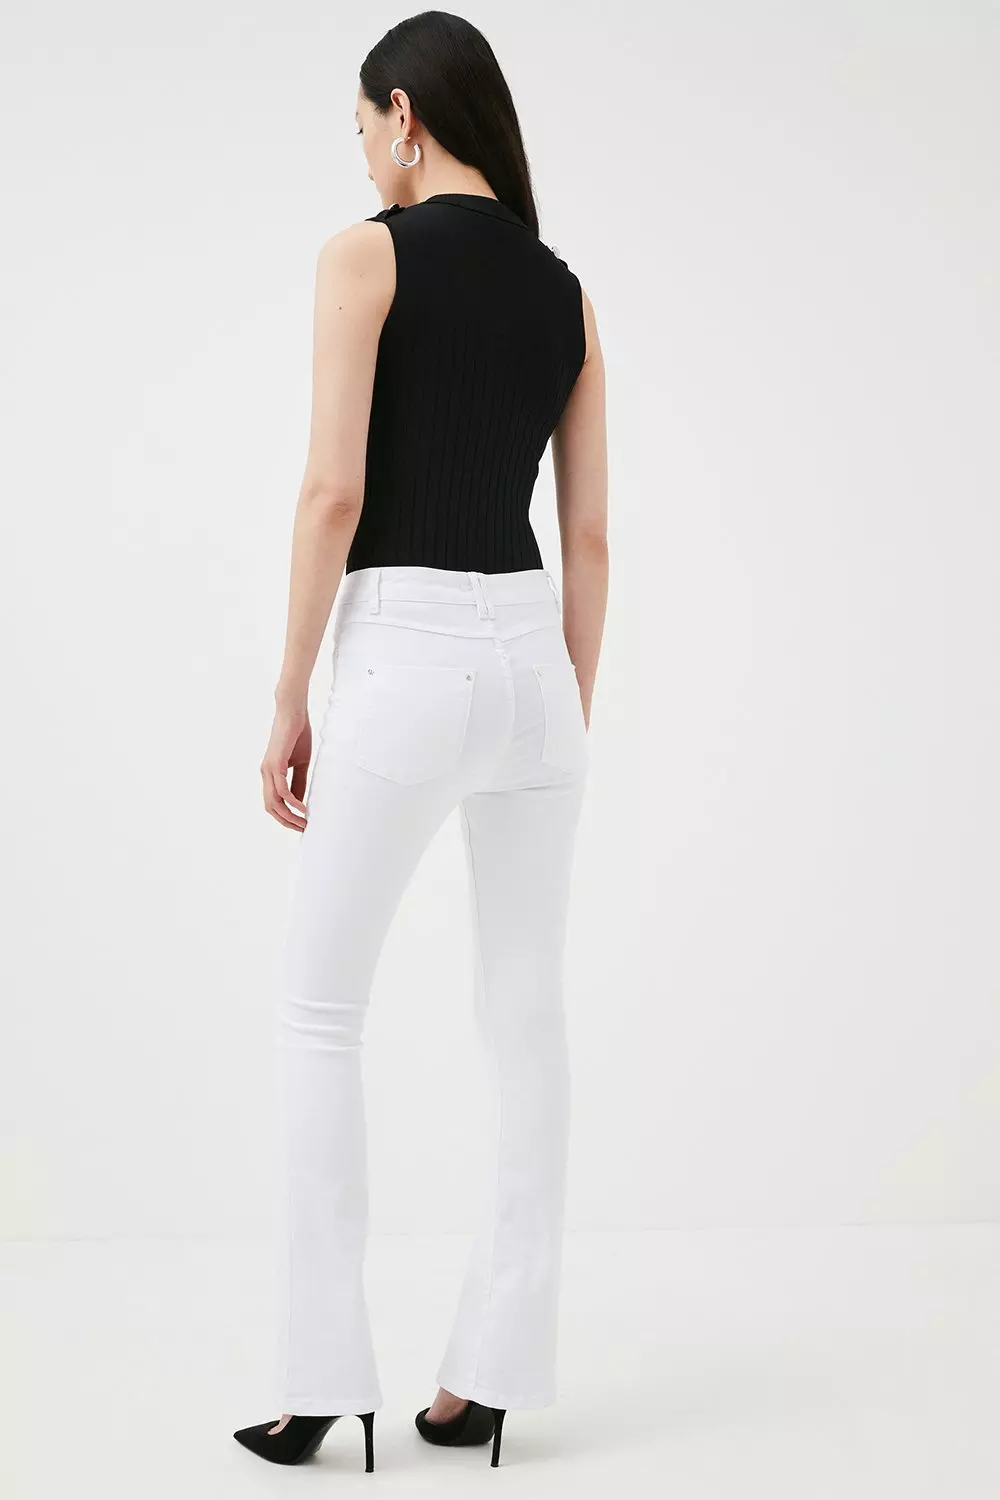 Flared Fit High waist Split hems Jeans with 20% discount!